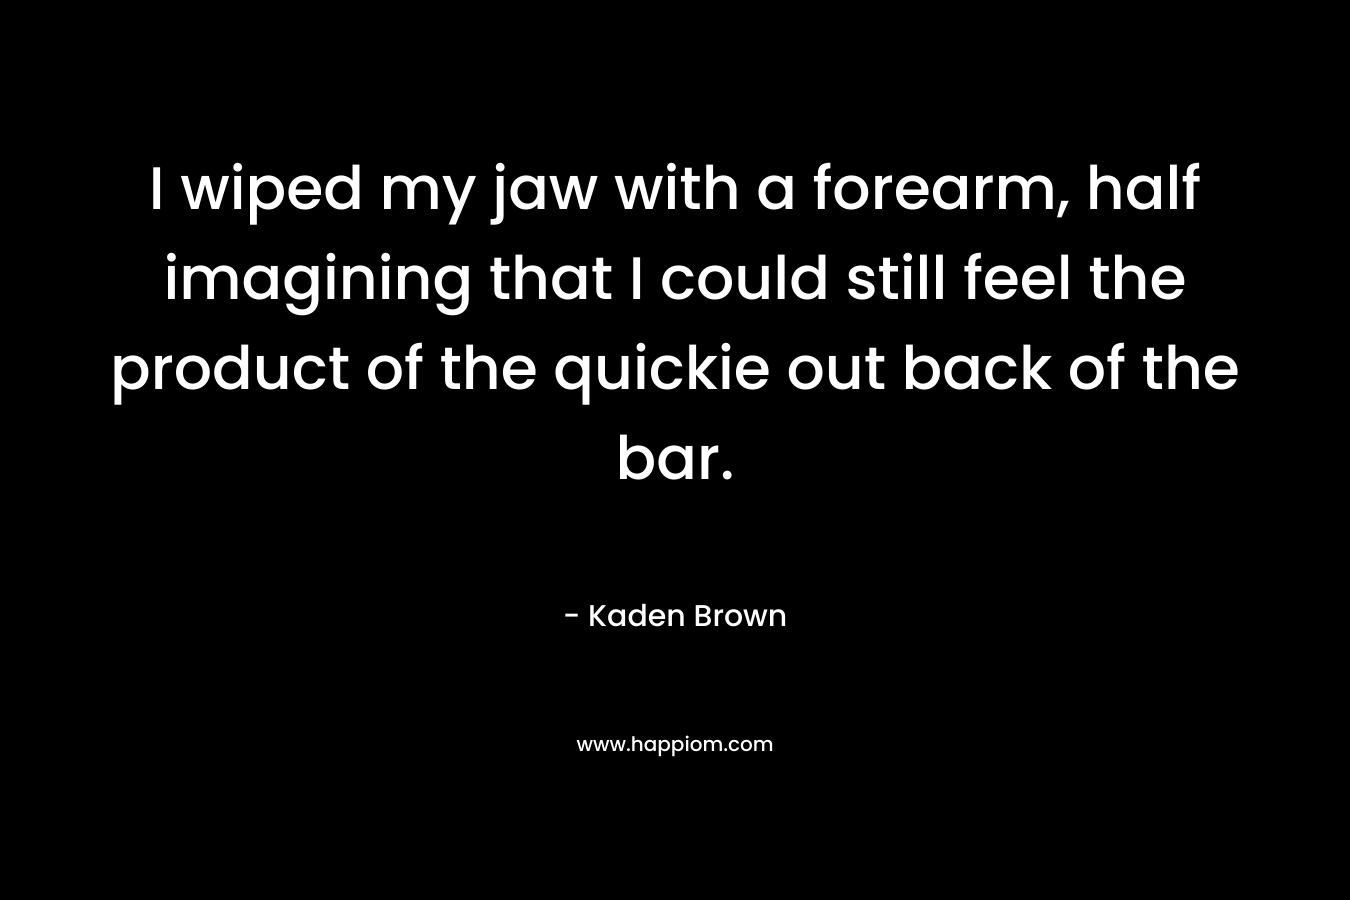 I wiped my jaw with a forearm, half imagining that I could still feel the product of the quickie out back of the bar. – Kaden Brown